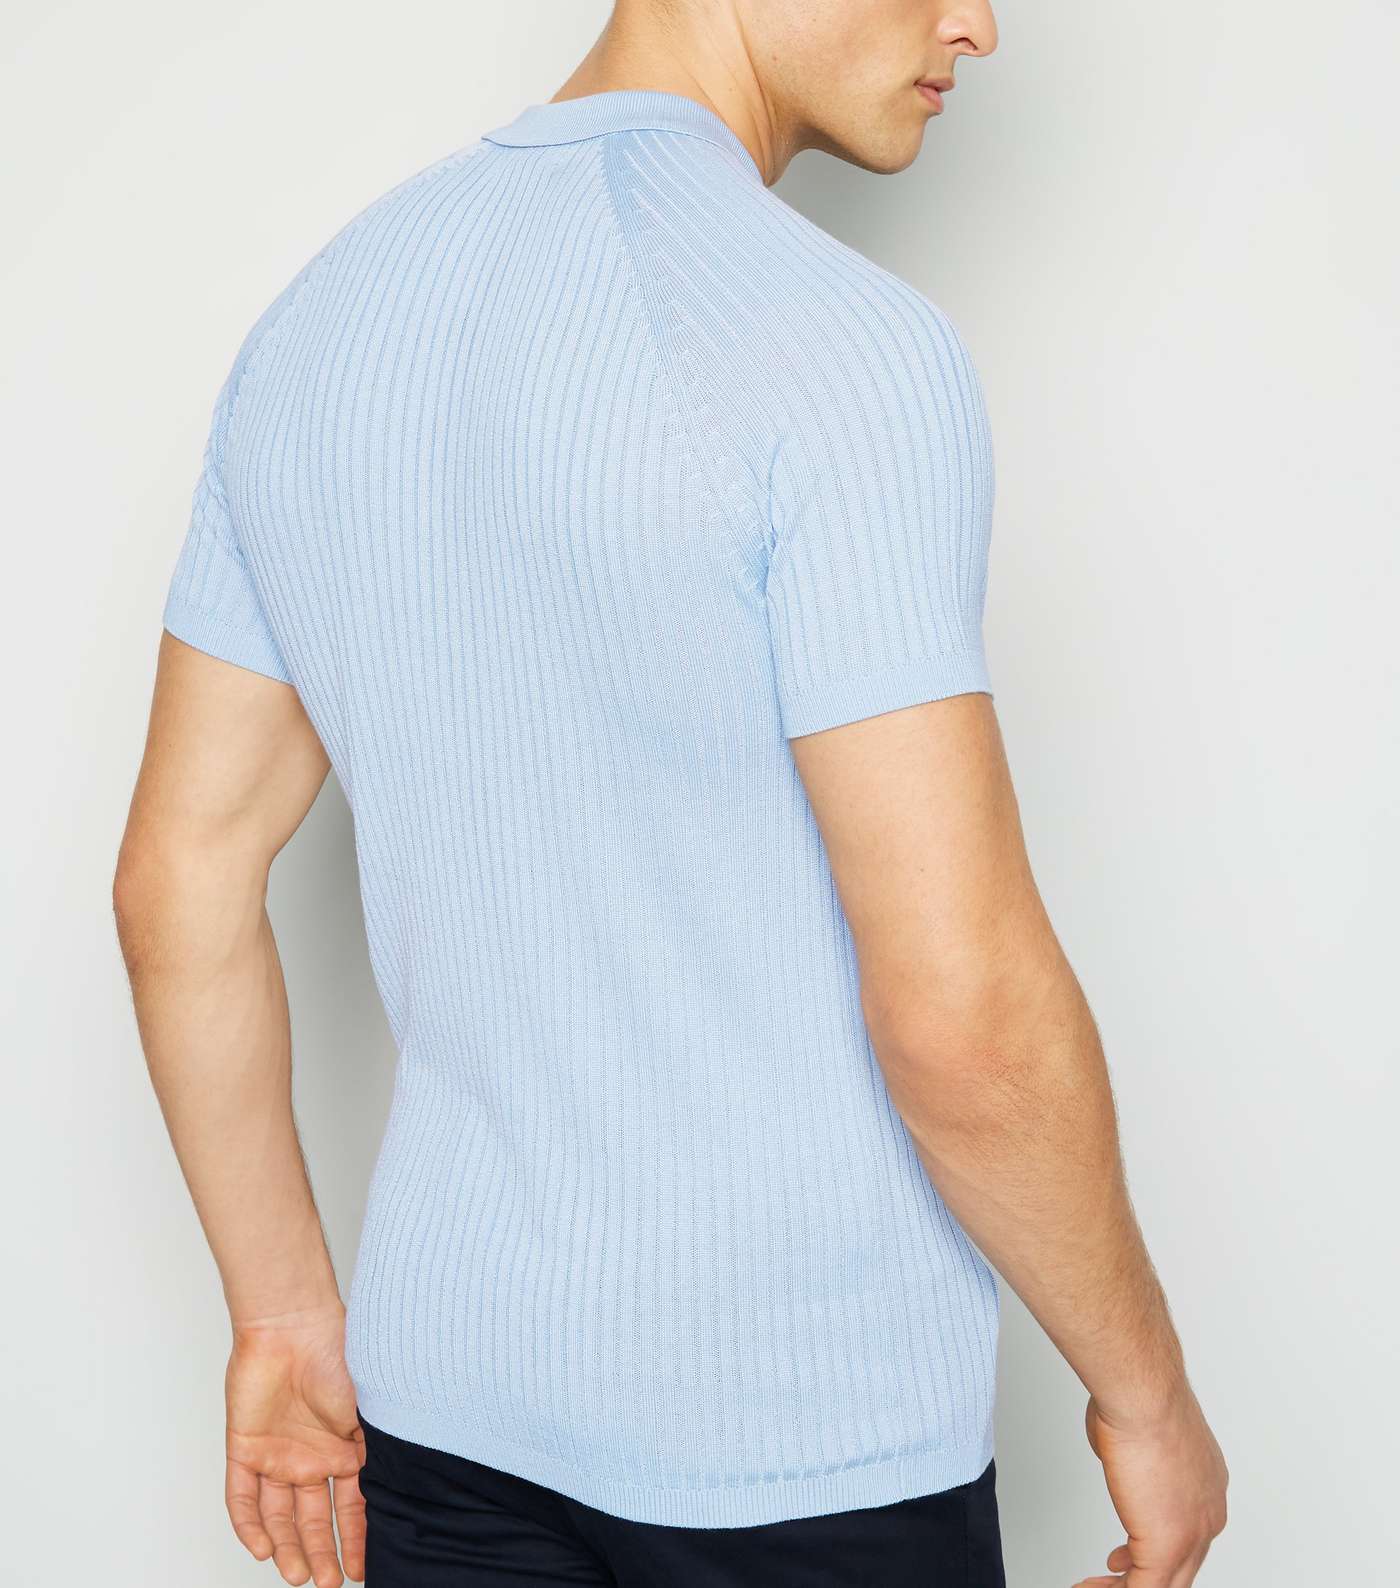 Pale Blue Knit Muscle Fit Polo Shirt Image 3